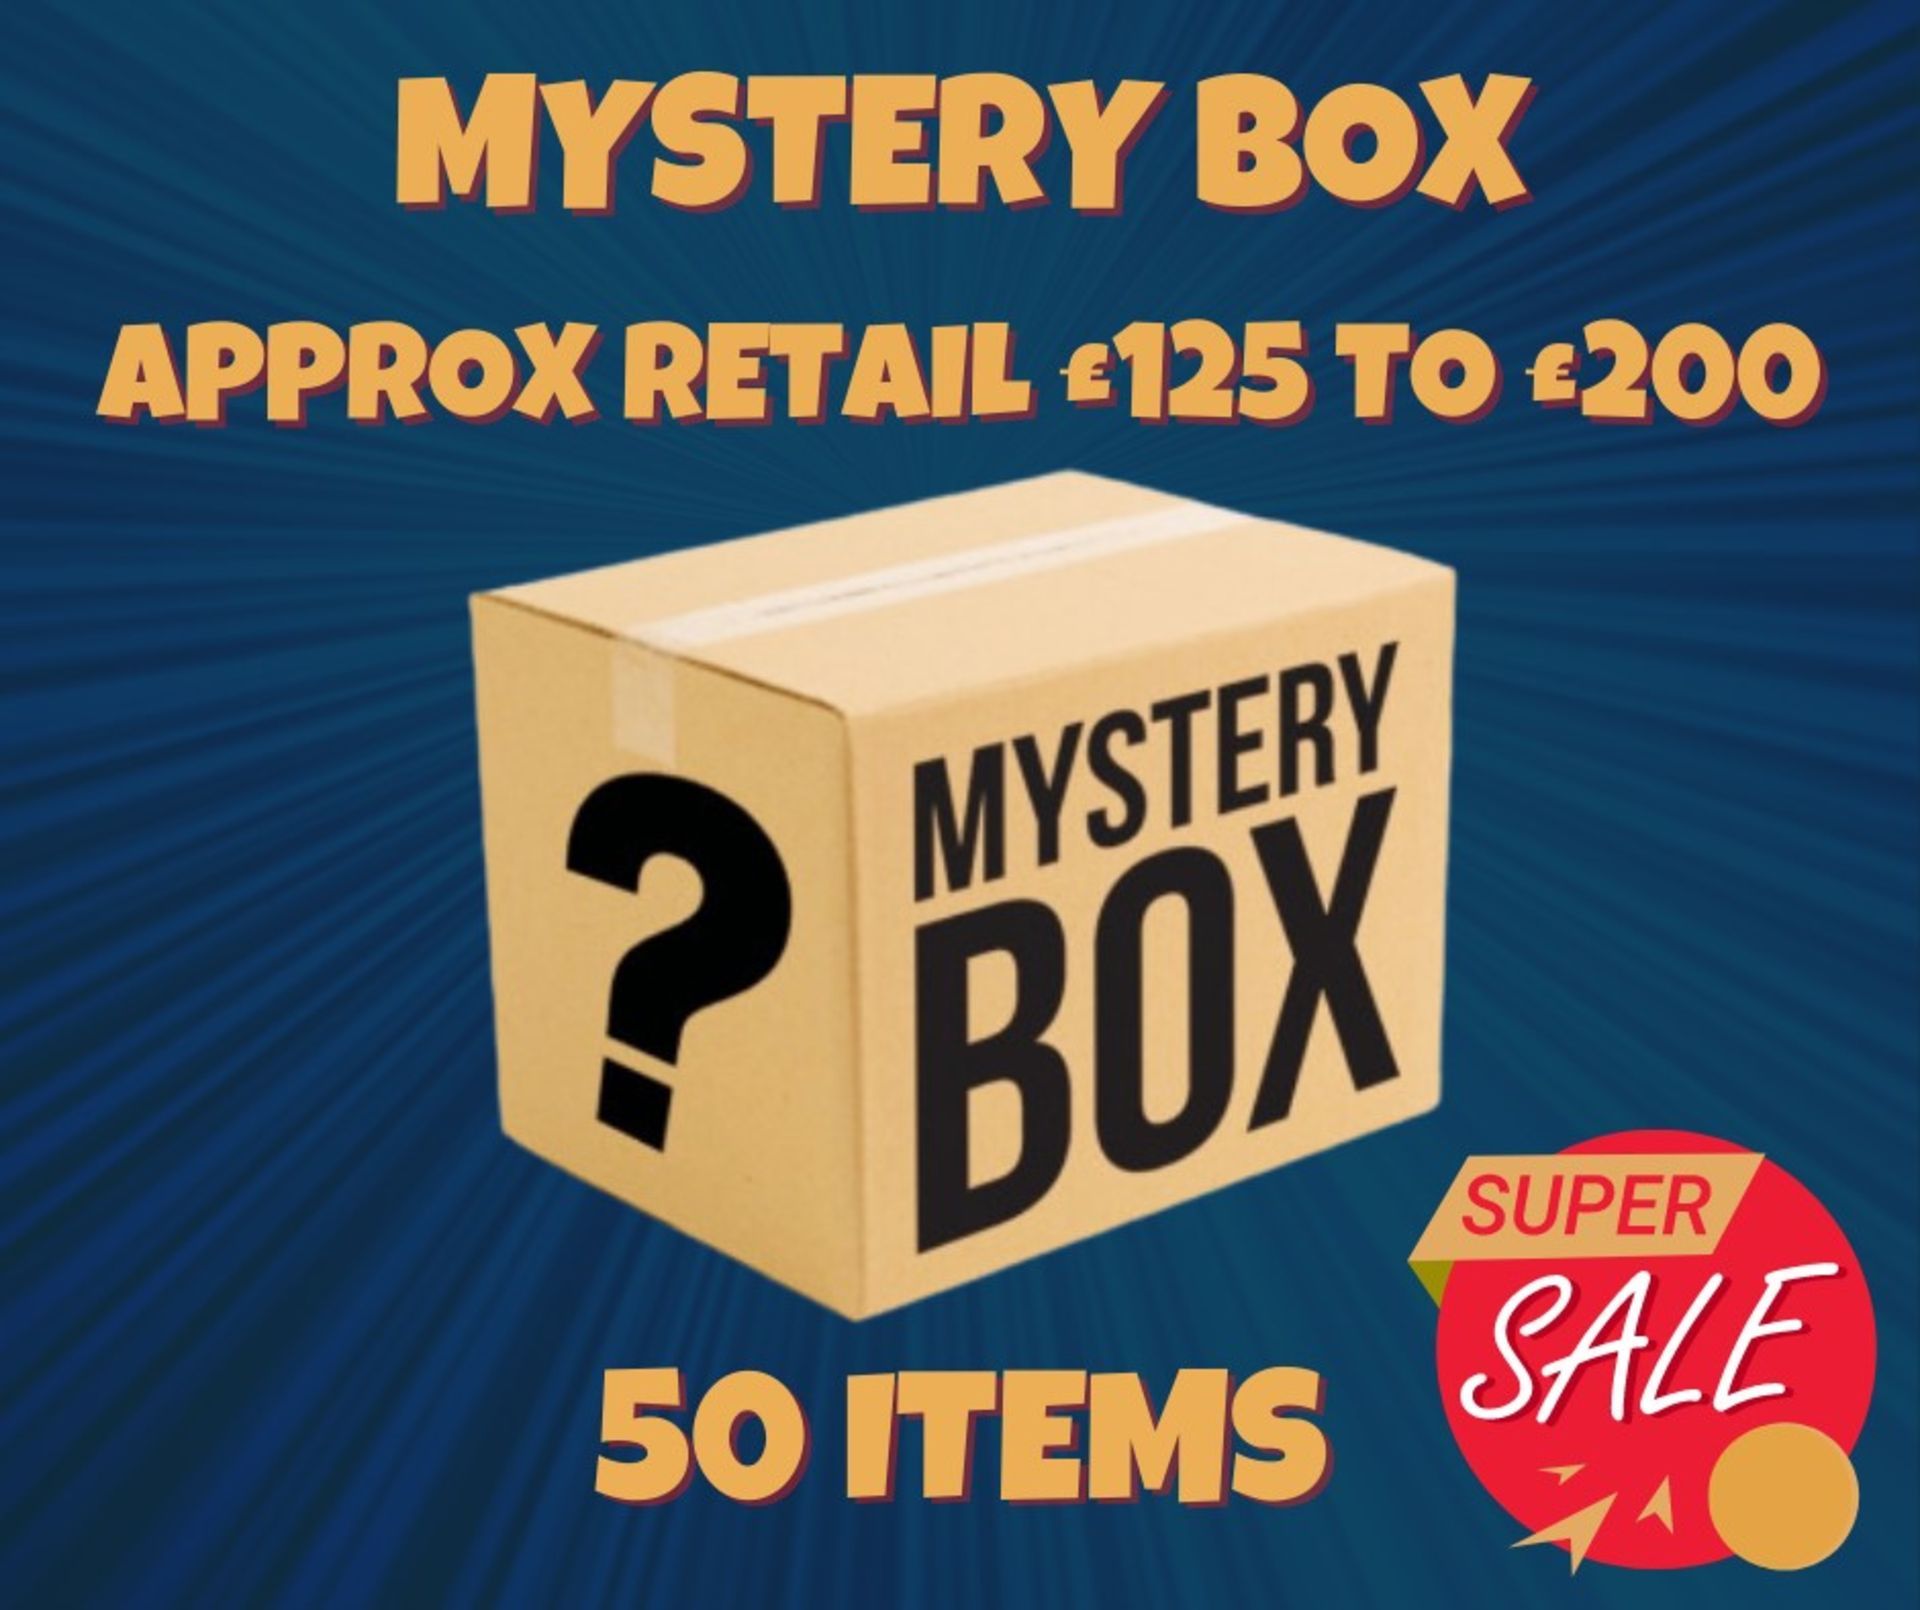 NEW MYSTERY BOX WITH 50 NEW ASSORTED AMAZON ITEMS - BOX CONTENTS RRP £125 TO £200 - PLUS 5 FREE DVDS